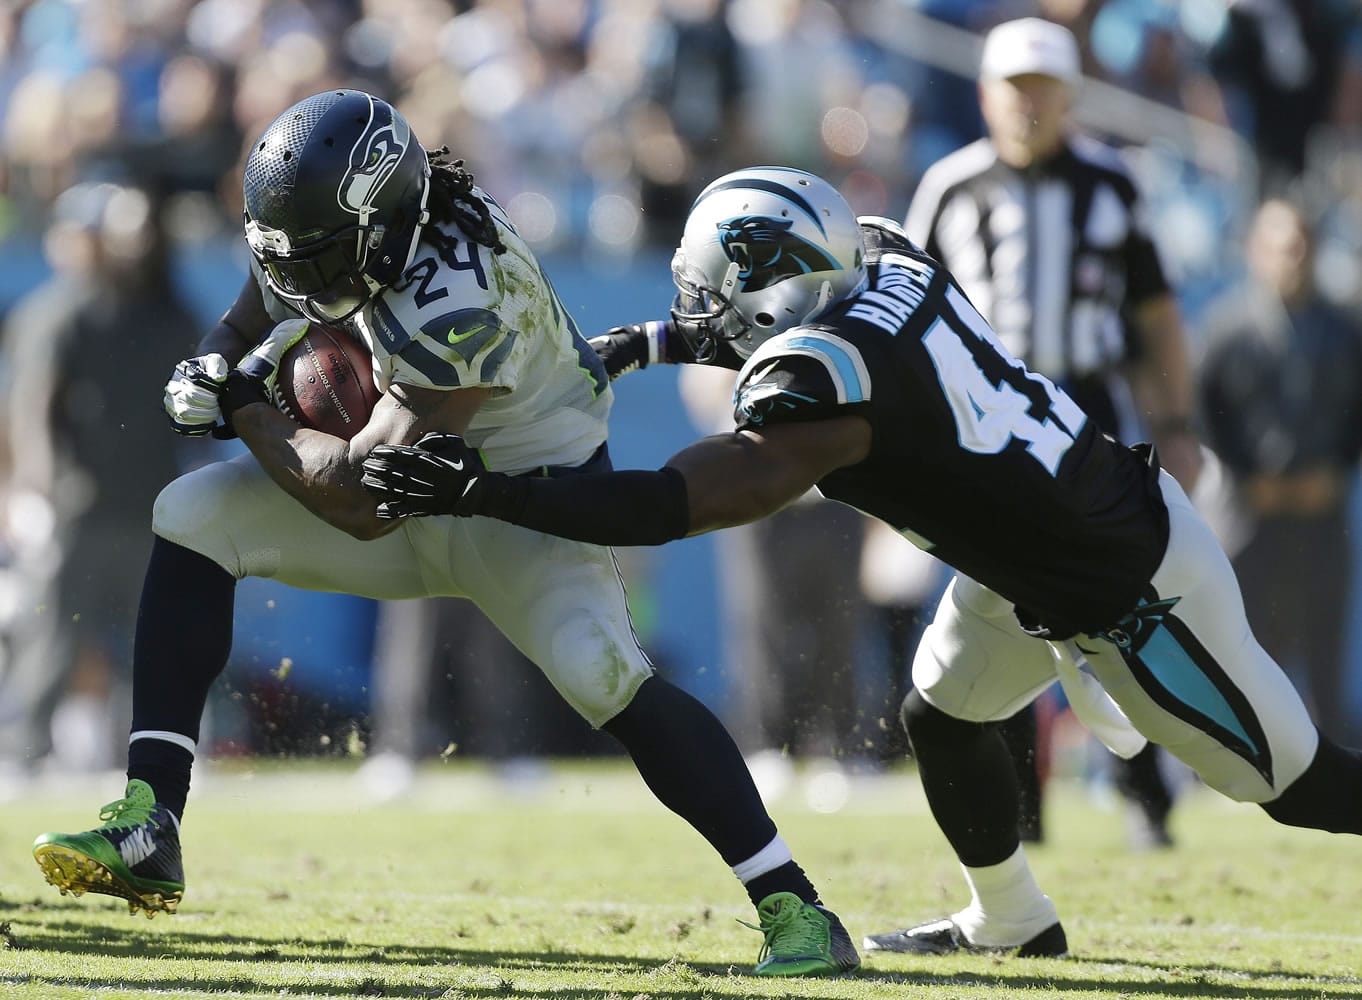 No. 1 - Seattle must run against Carolina's ailing defensive front. The bedrock of the Seahawks offense is Marshawn Lynch's running game. In Carolina, Seattle faces a team that allows 5.0 yards per rush between the tackles, the worst in the NFL.